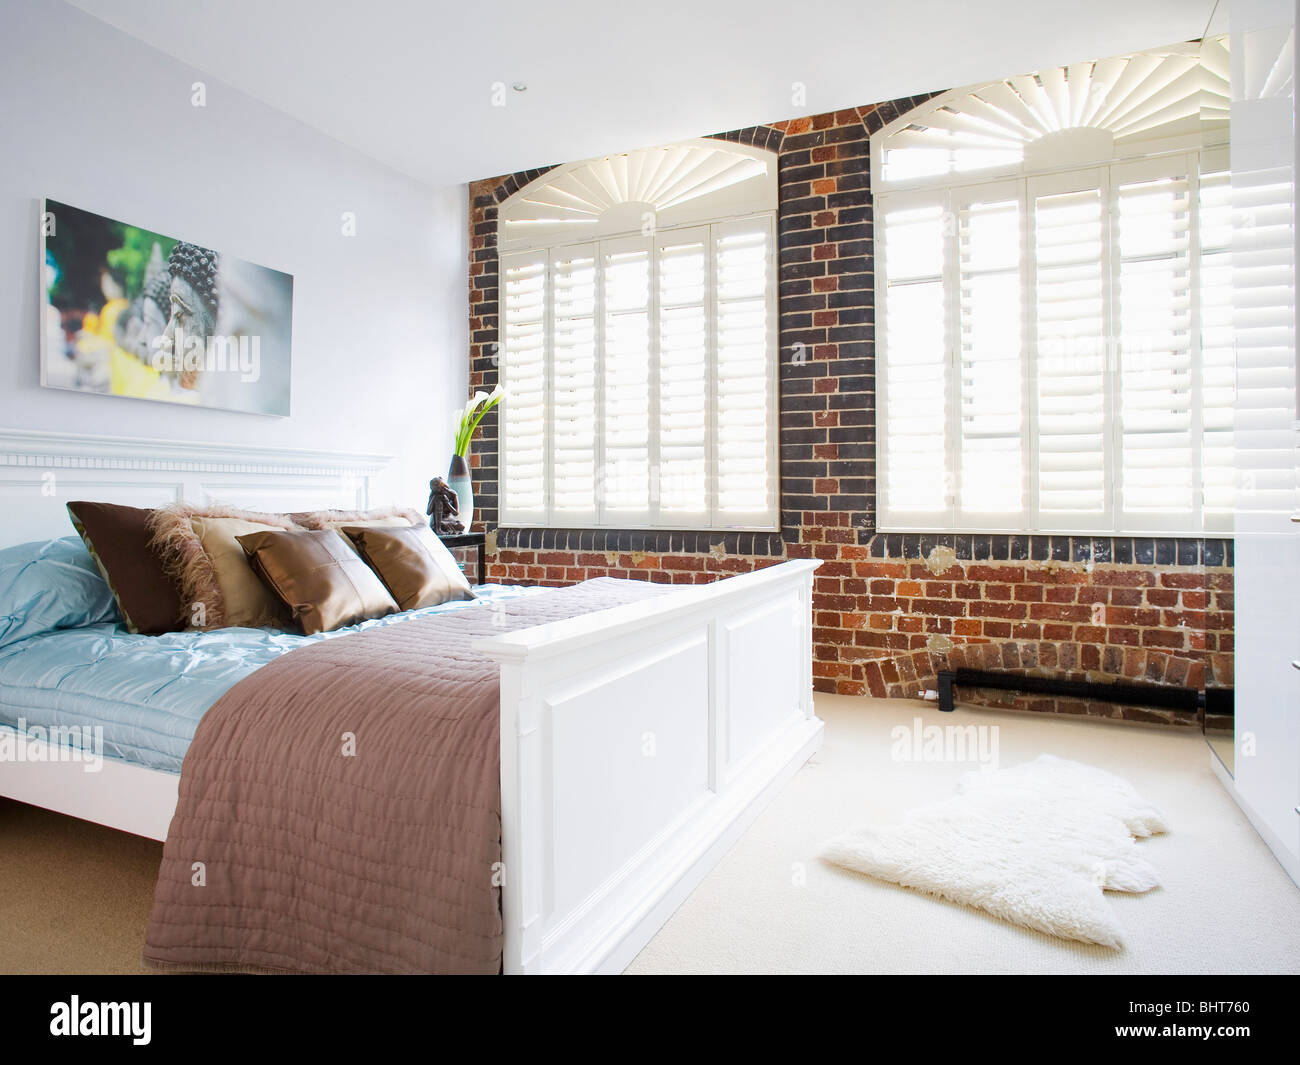 White Plantation Shutters On Window In Exposed Brick Wall In